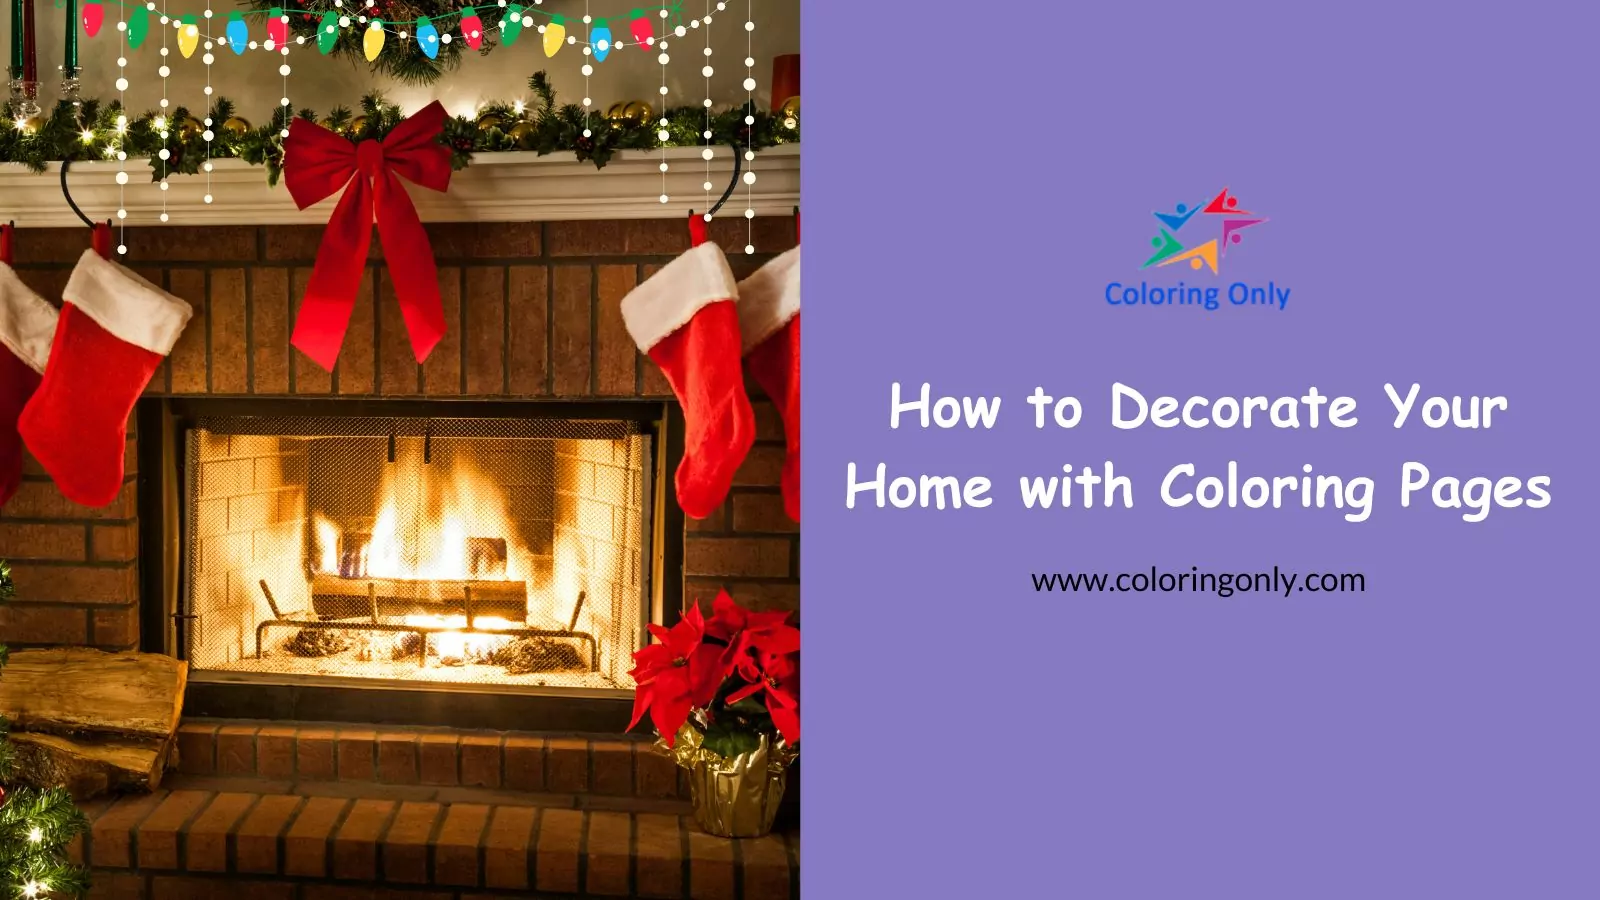 How to Decorate Your Home with Coloring Pages